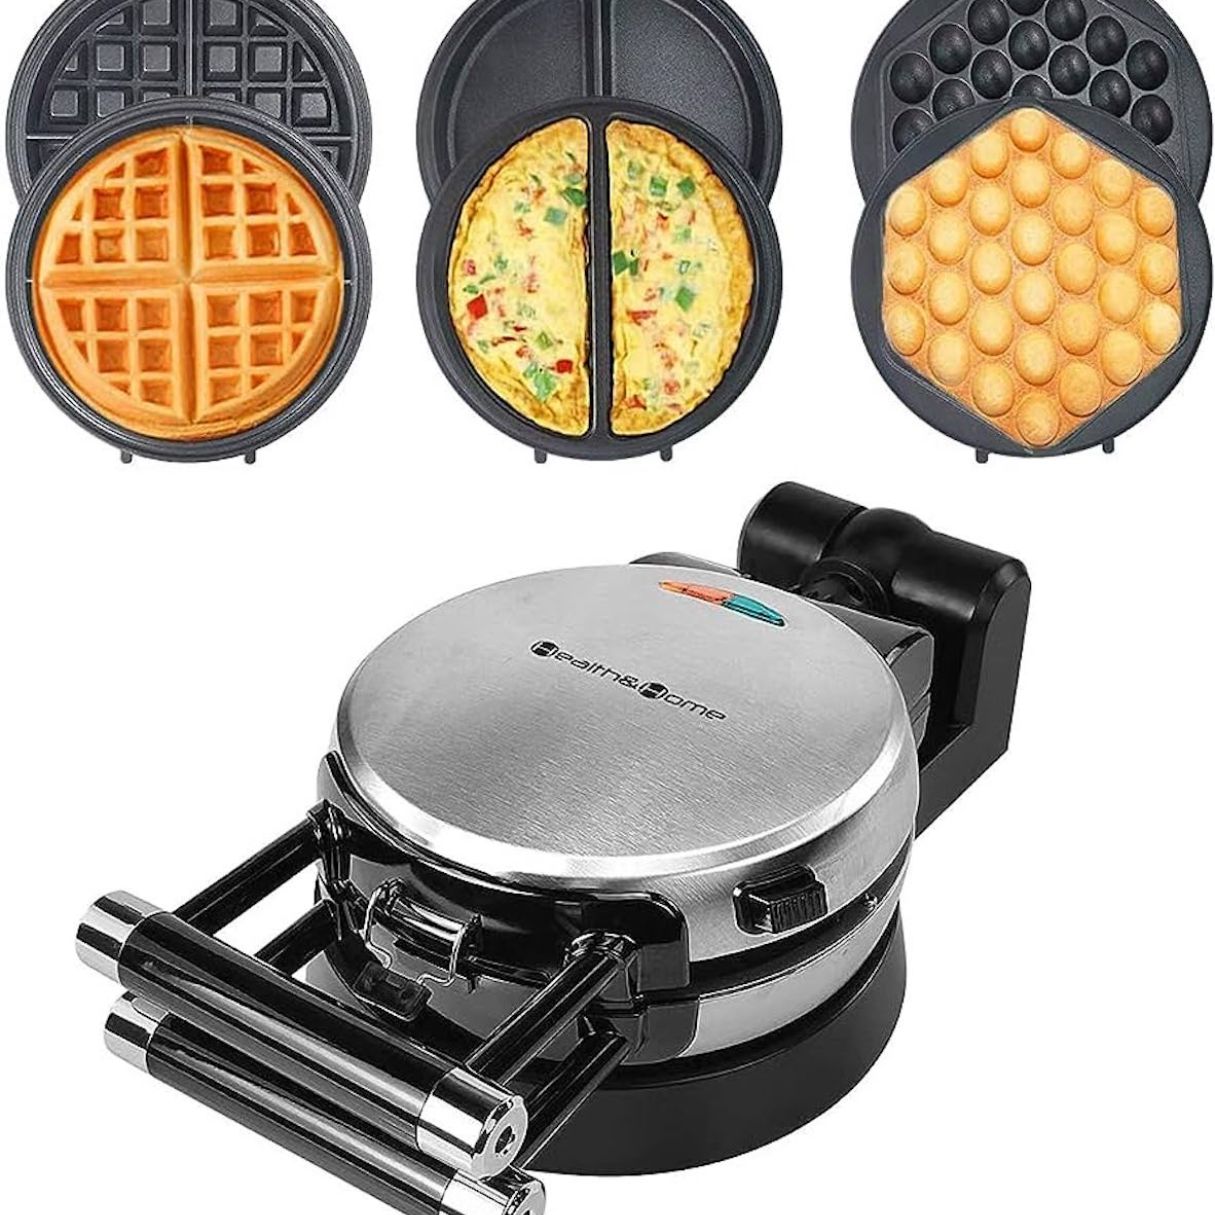  BELLA Classic Waffle Iron, 4 Square Belgian Waffle Maker,  Non-stick Extra Large Plates for Easy Cleanup, Cool Touch Handles,  Stainless Steel, Black, 1400W: Home & Kitchen